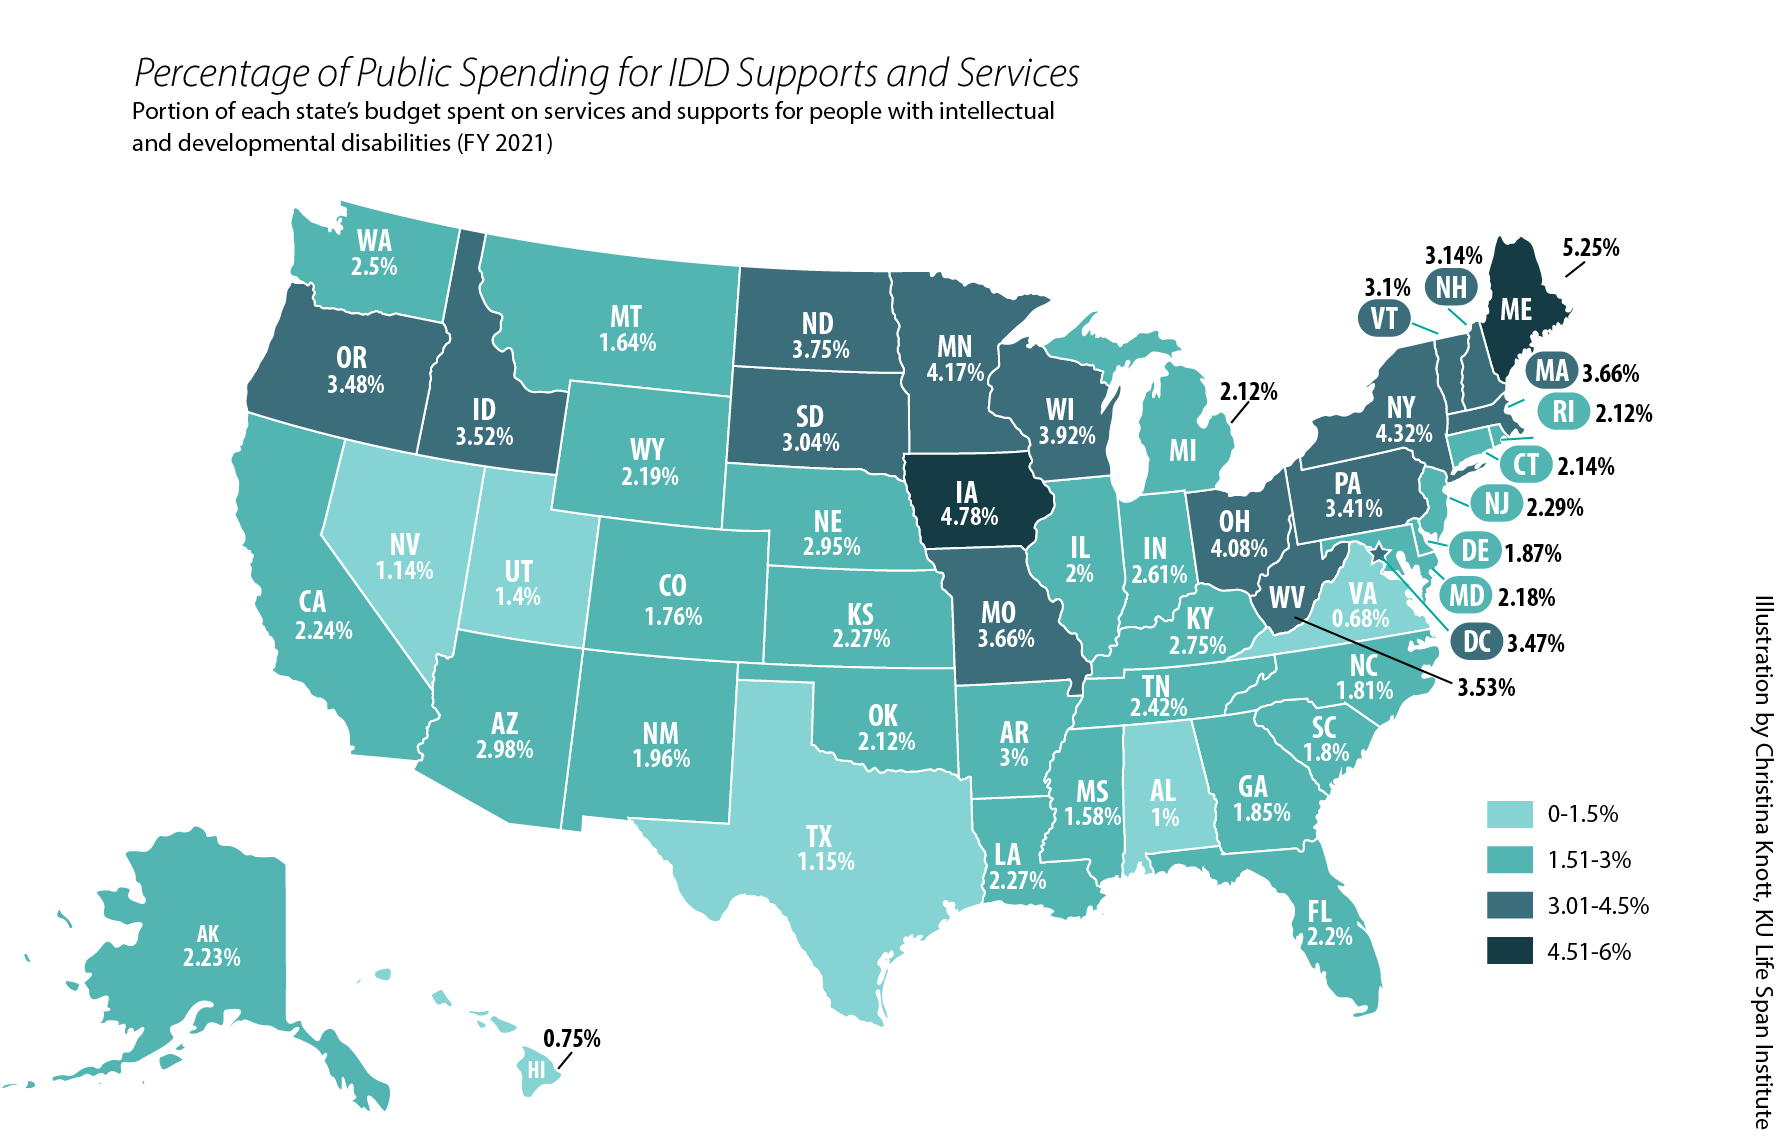 U.S. map showing percentage of public spending for IDD supports and services